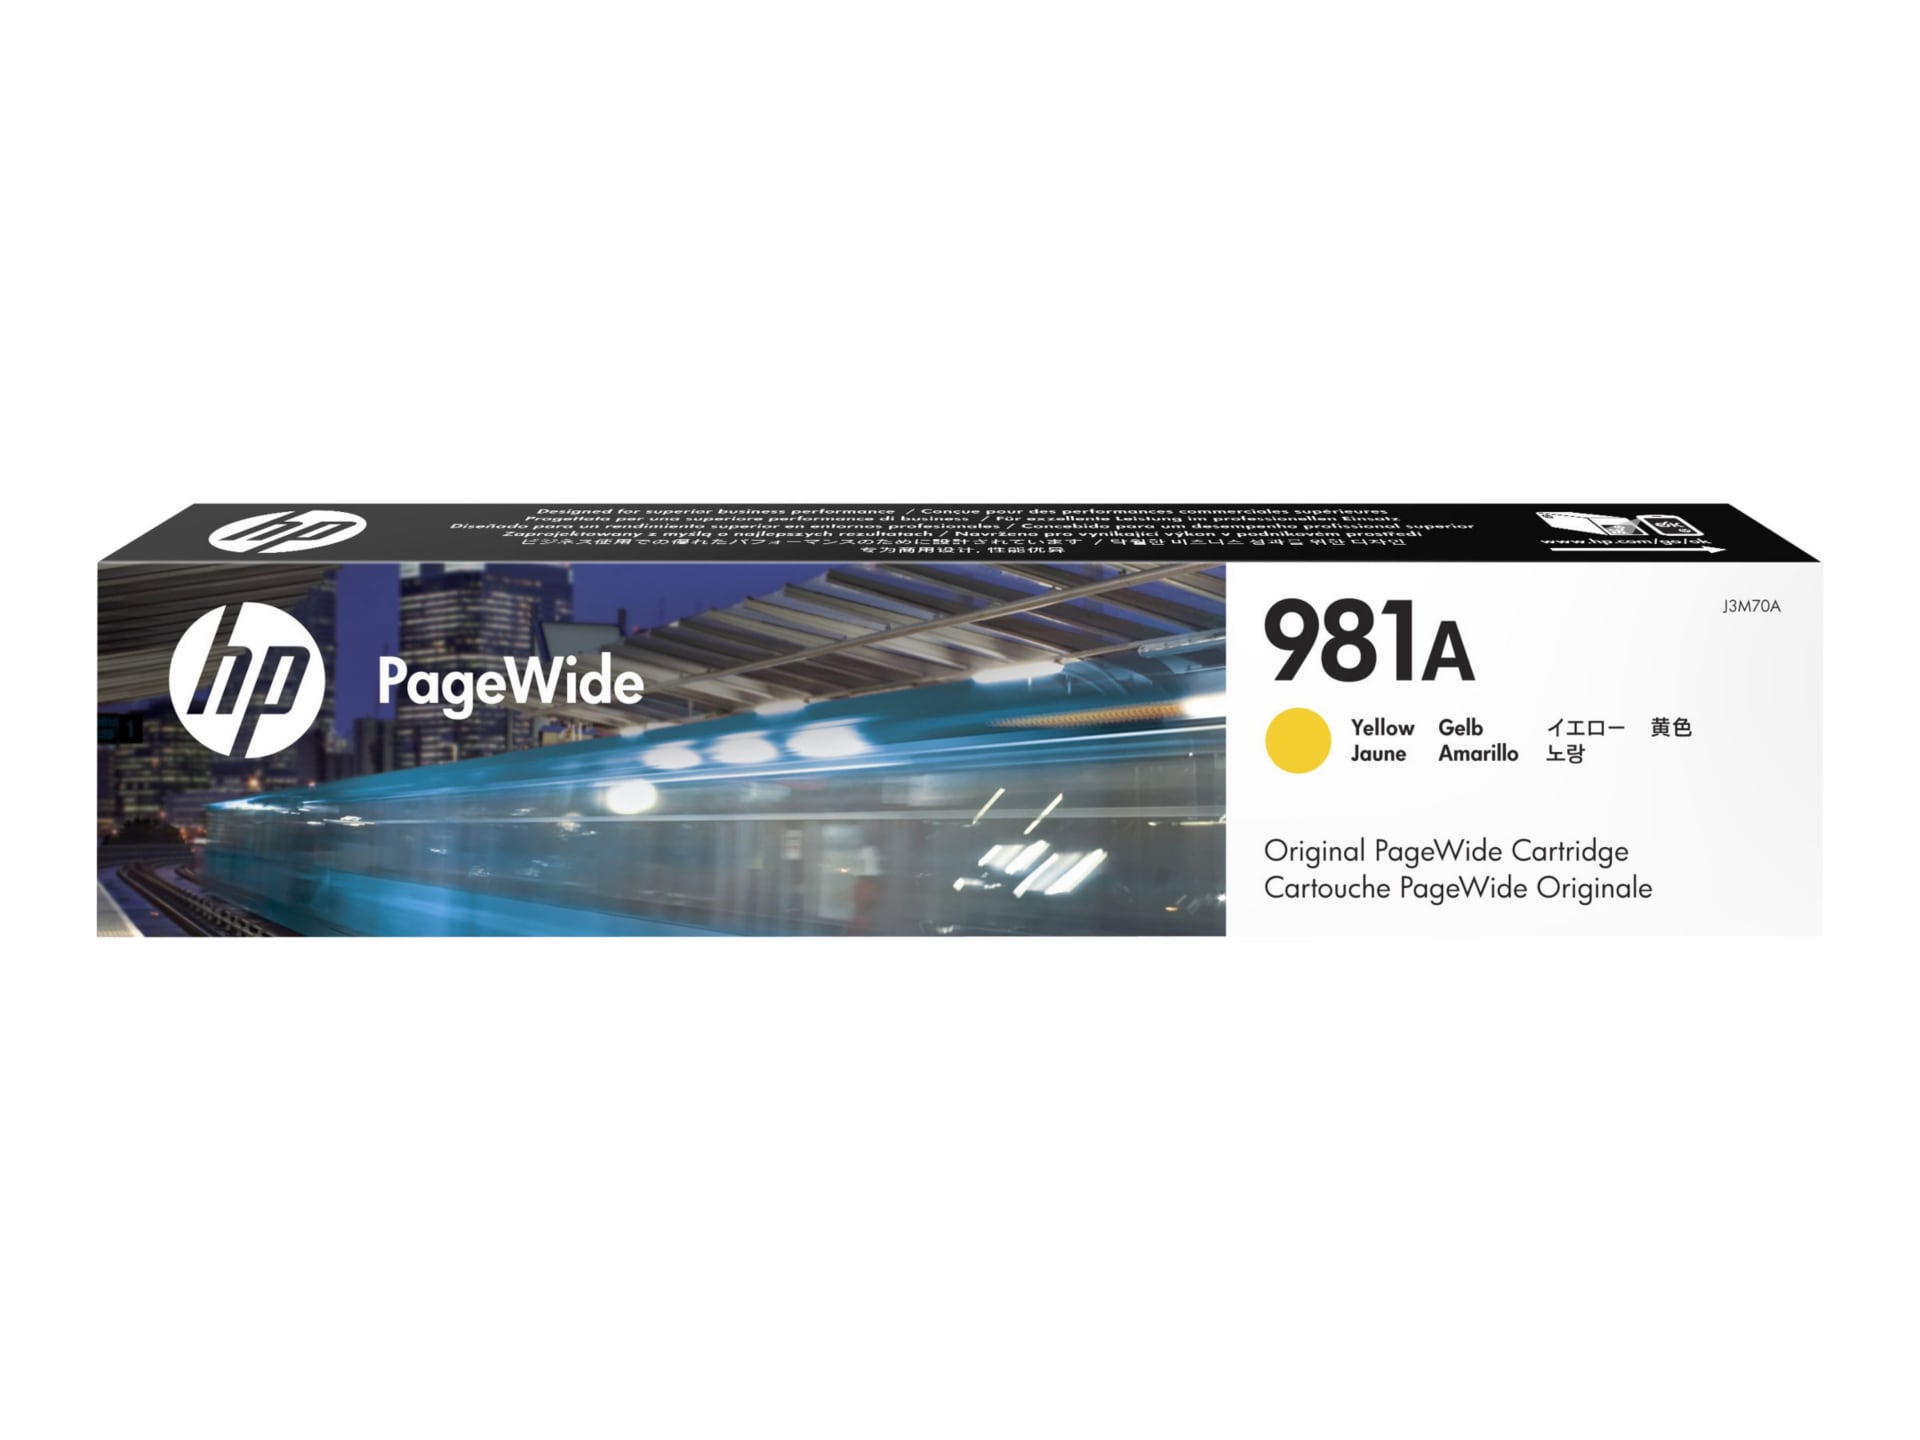 HP 981A (J3M70A) Original Page Wide Ink Cartridge - Single Pack - Yellow -